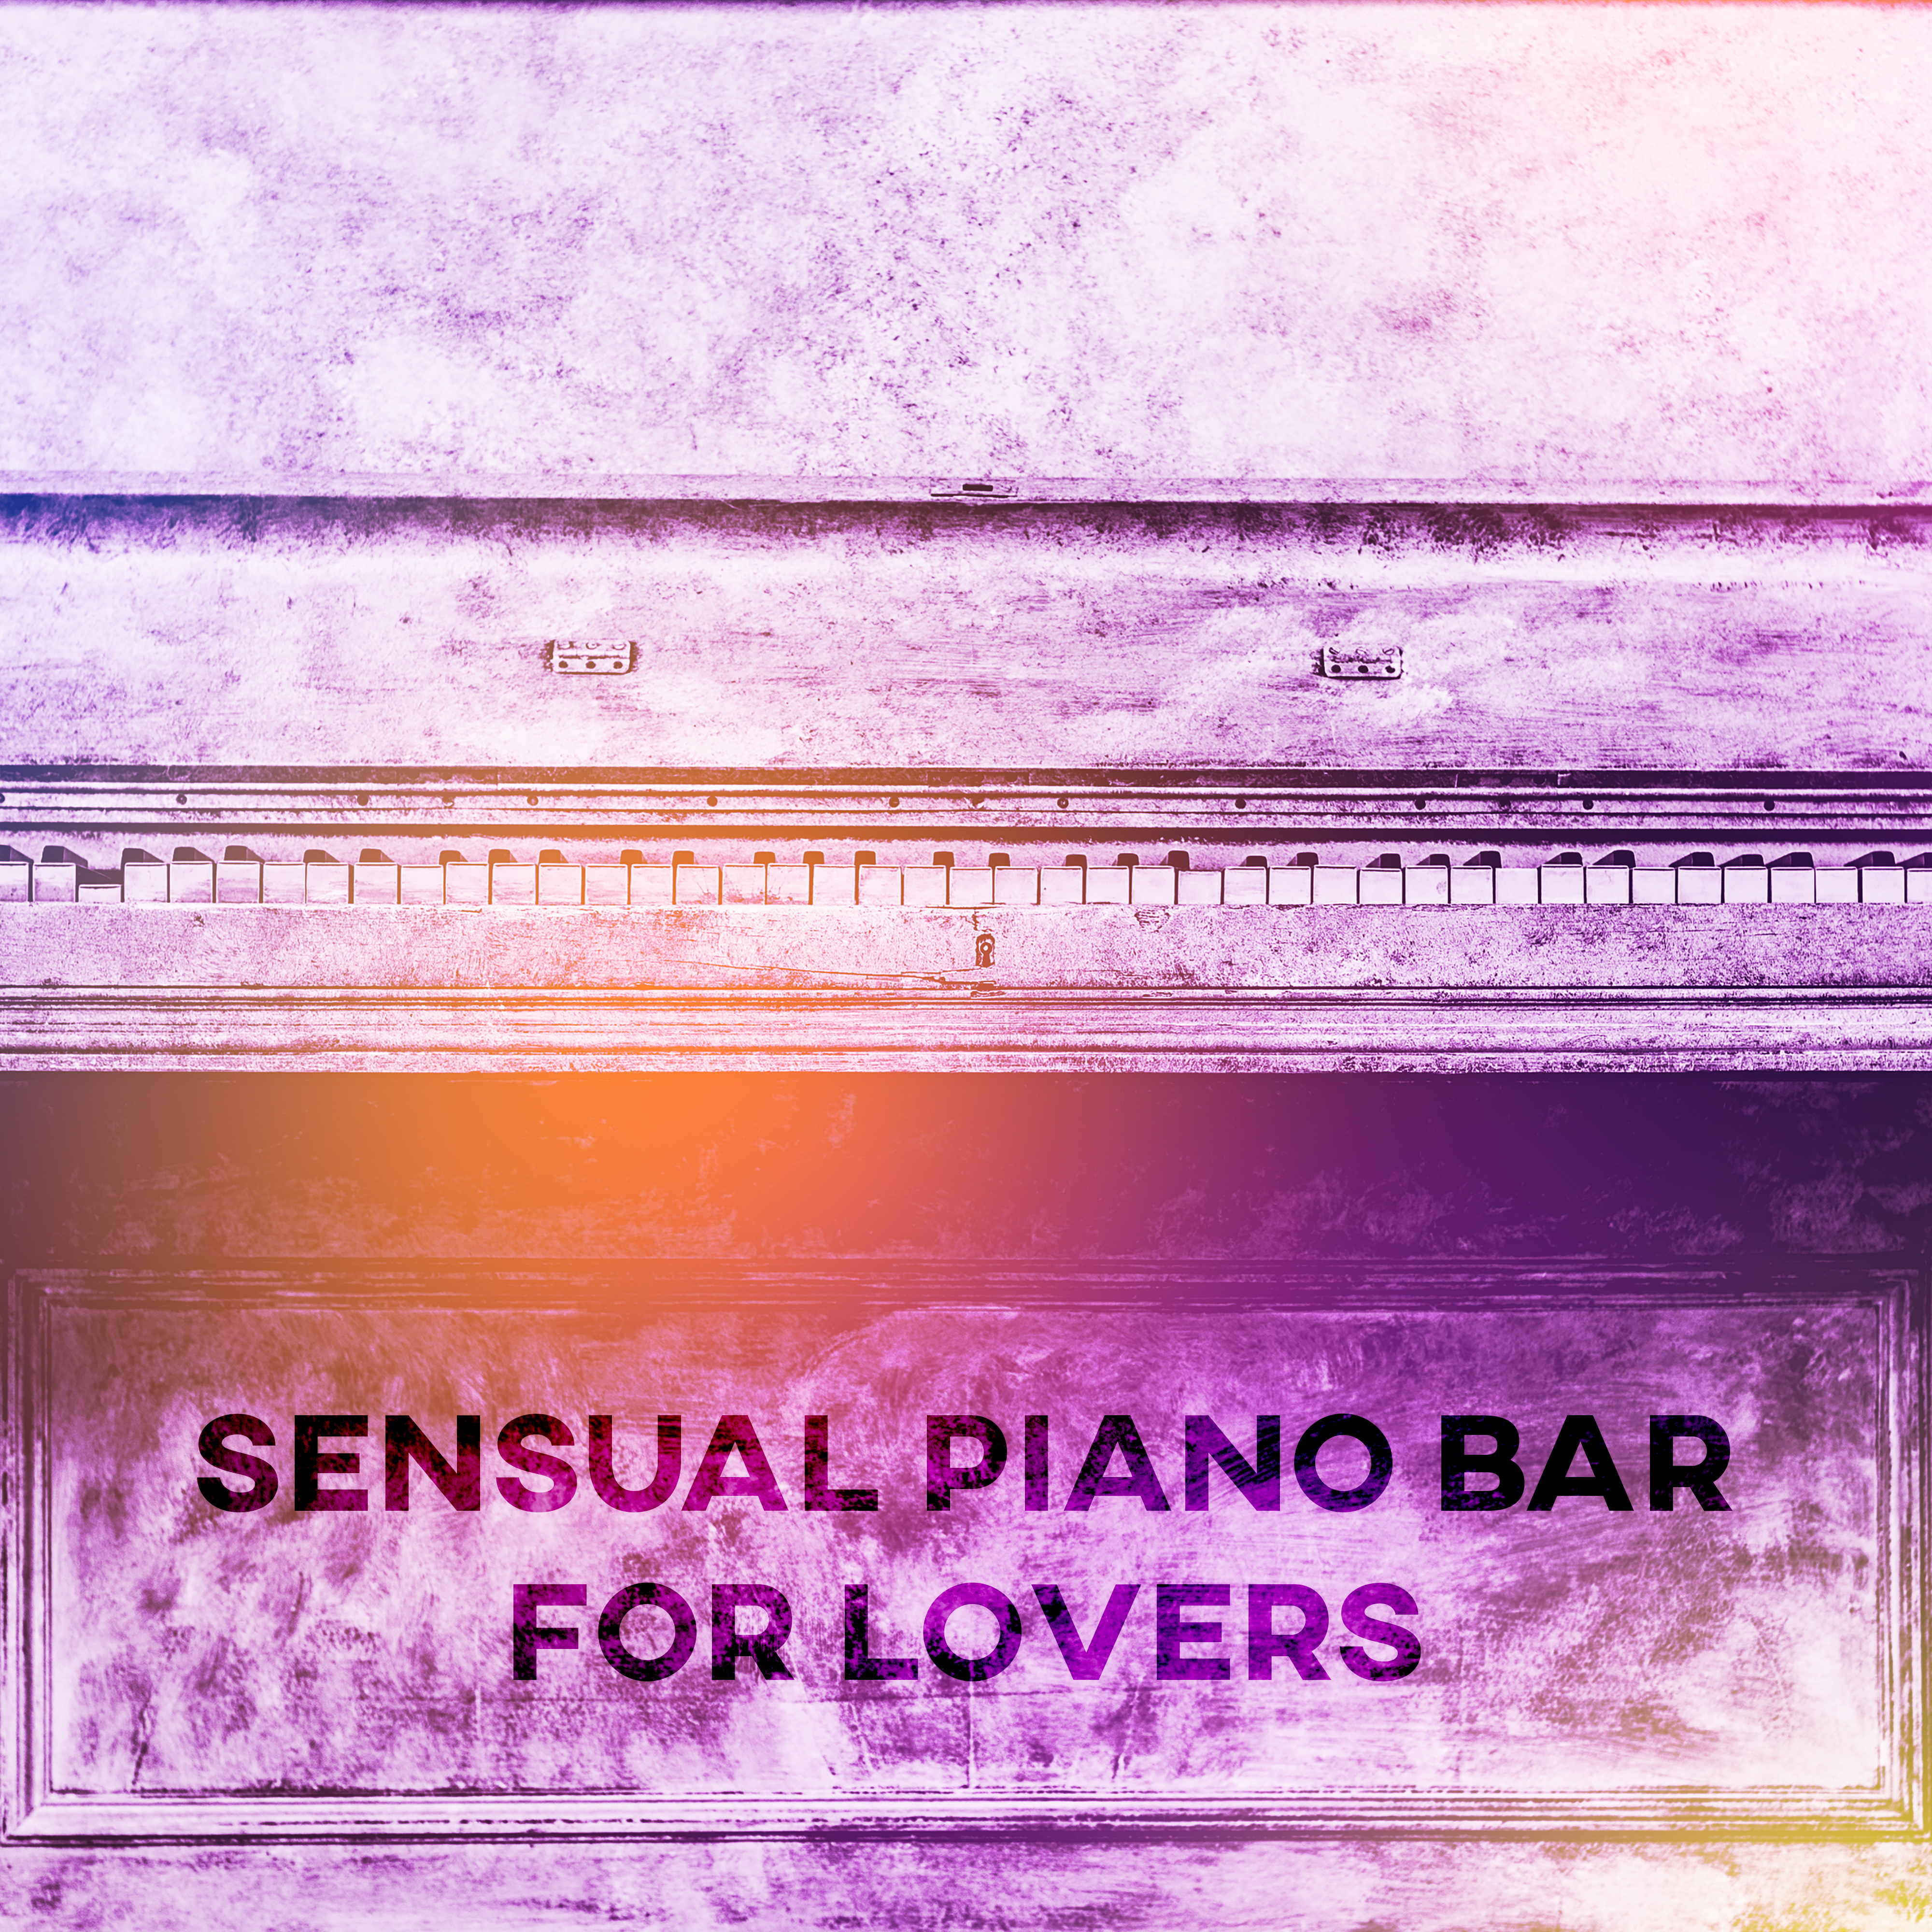 Sensual Piano Bar for Lovers – Calming Sounds for Night, Romantic Evening, **** Moves, Jazz Music